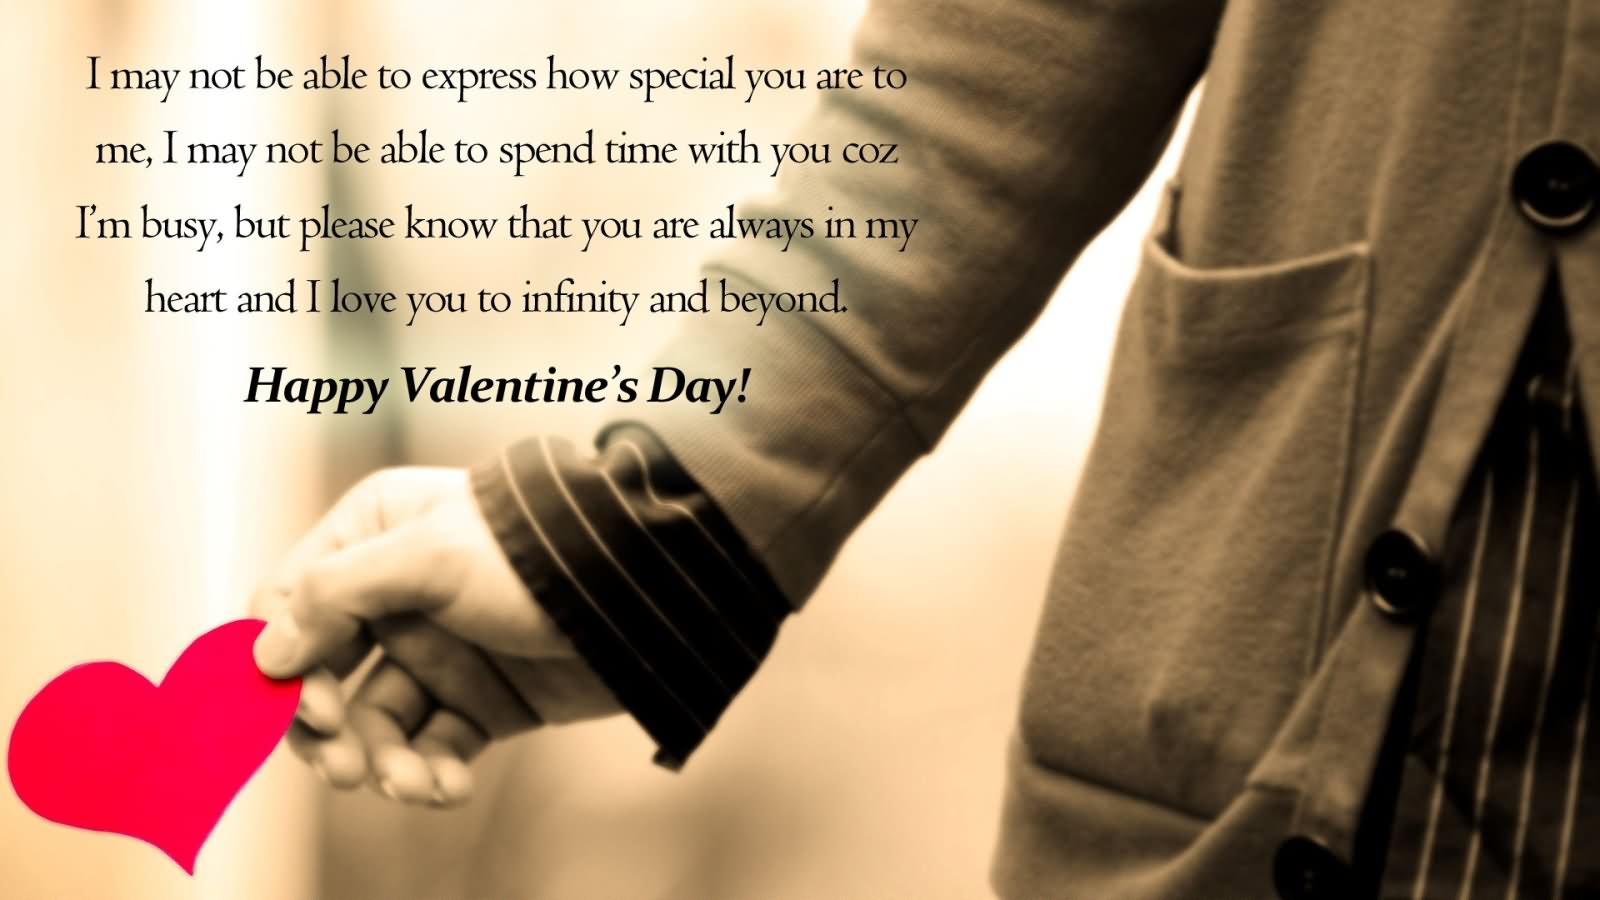 I may not be able to express how special you are to me,I may not be able to spend time with you because I’m busy,but please know that you are always in my heart and i love you to infinity and beyond.Happy valentines day!